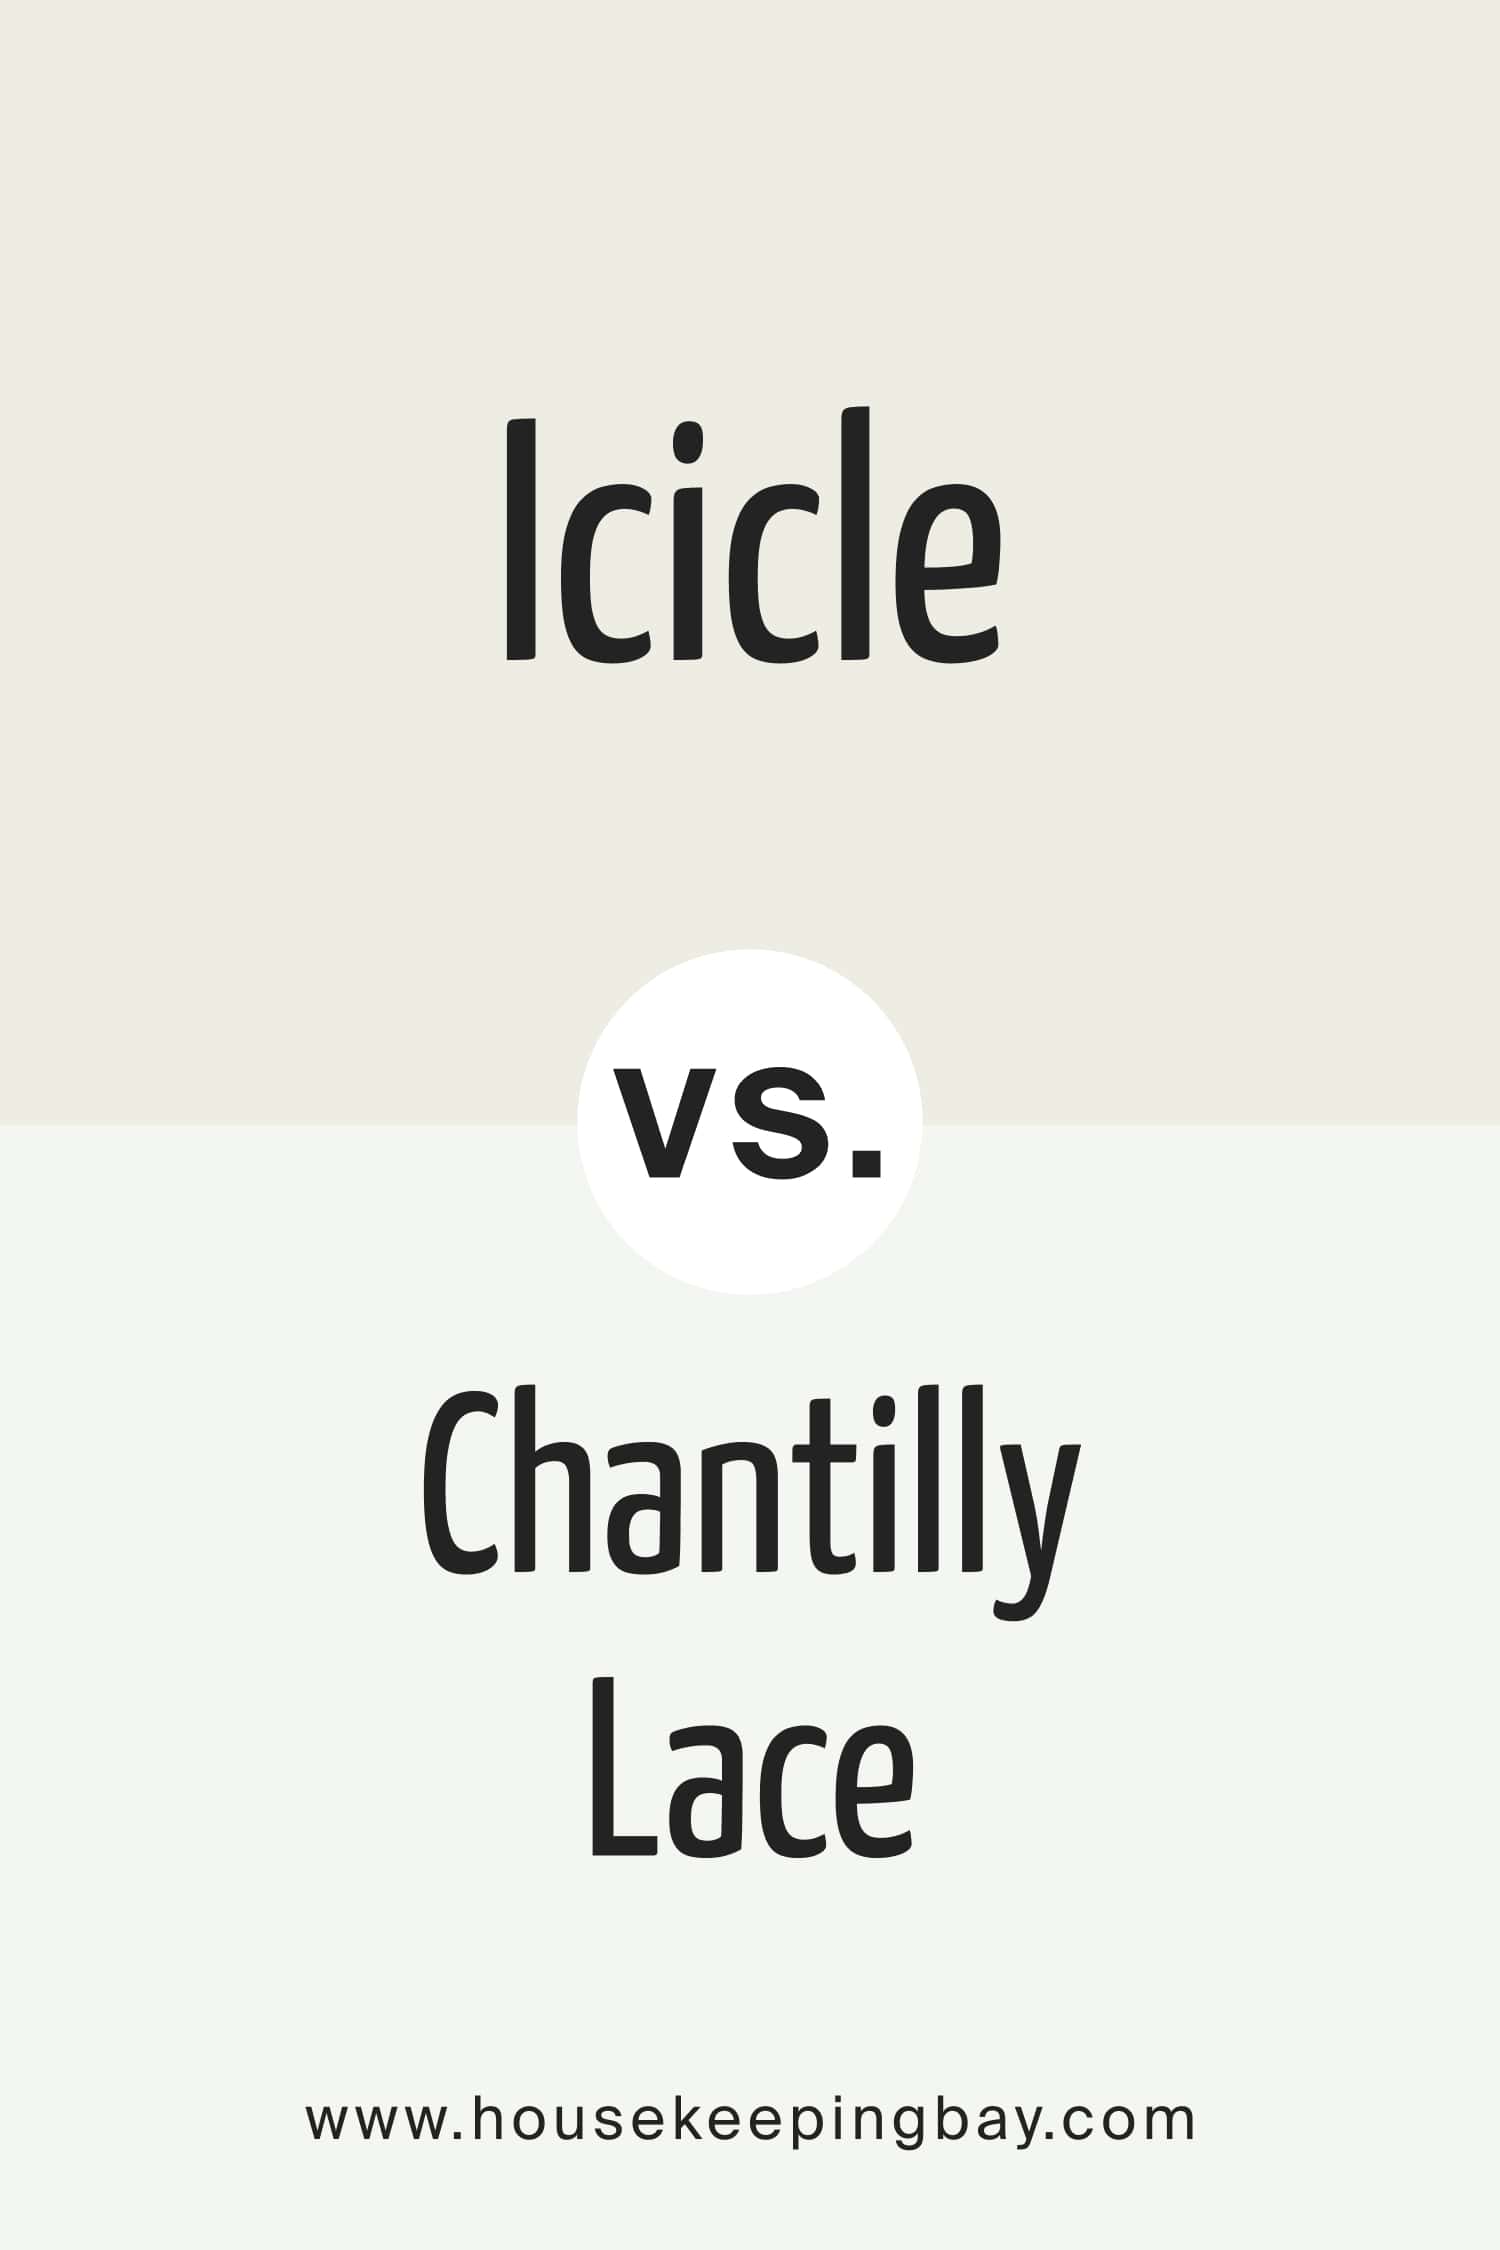 Icicle vs Chantilly Lace